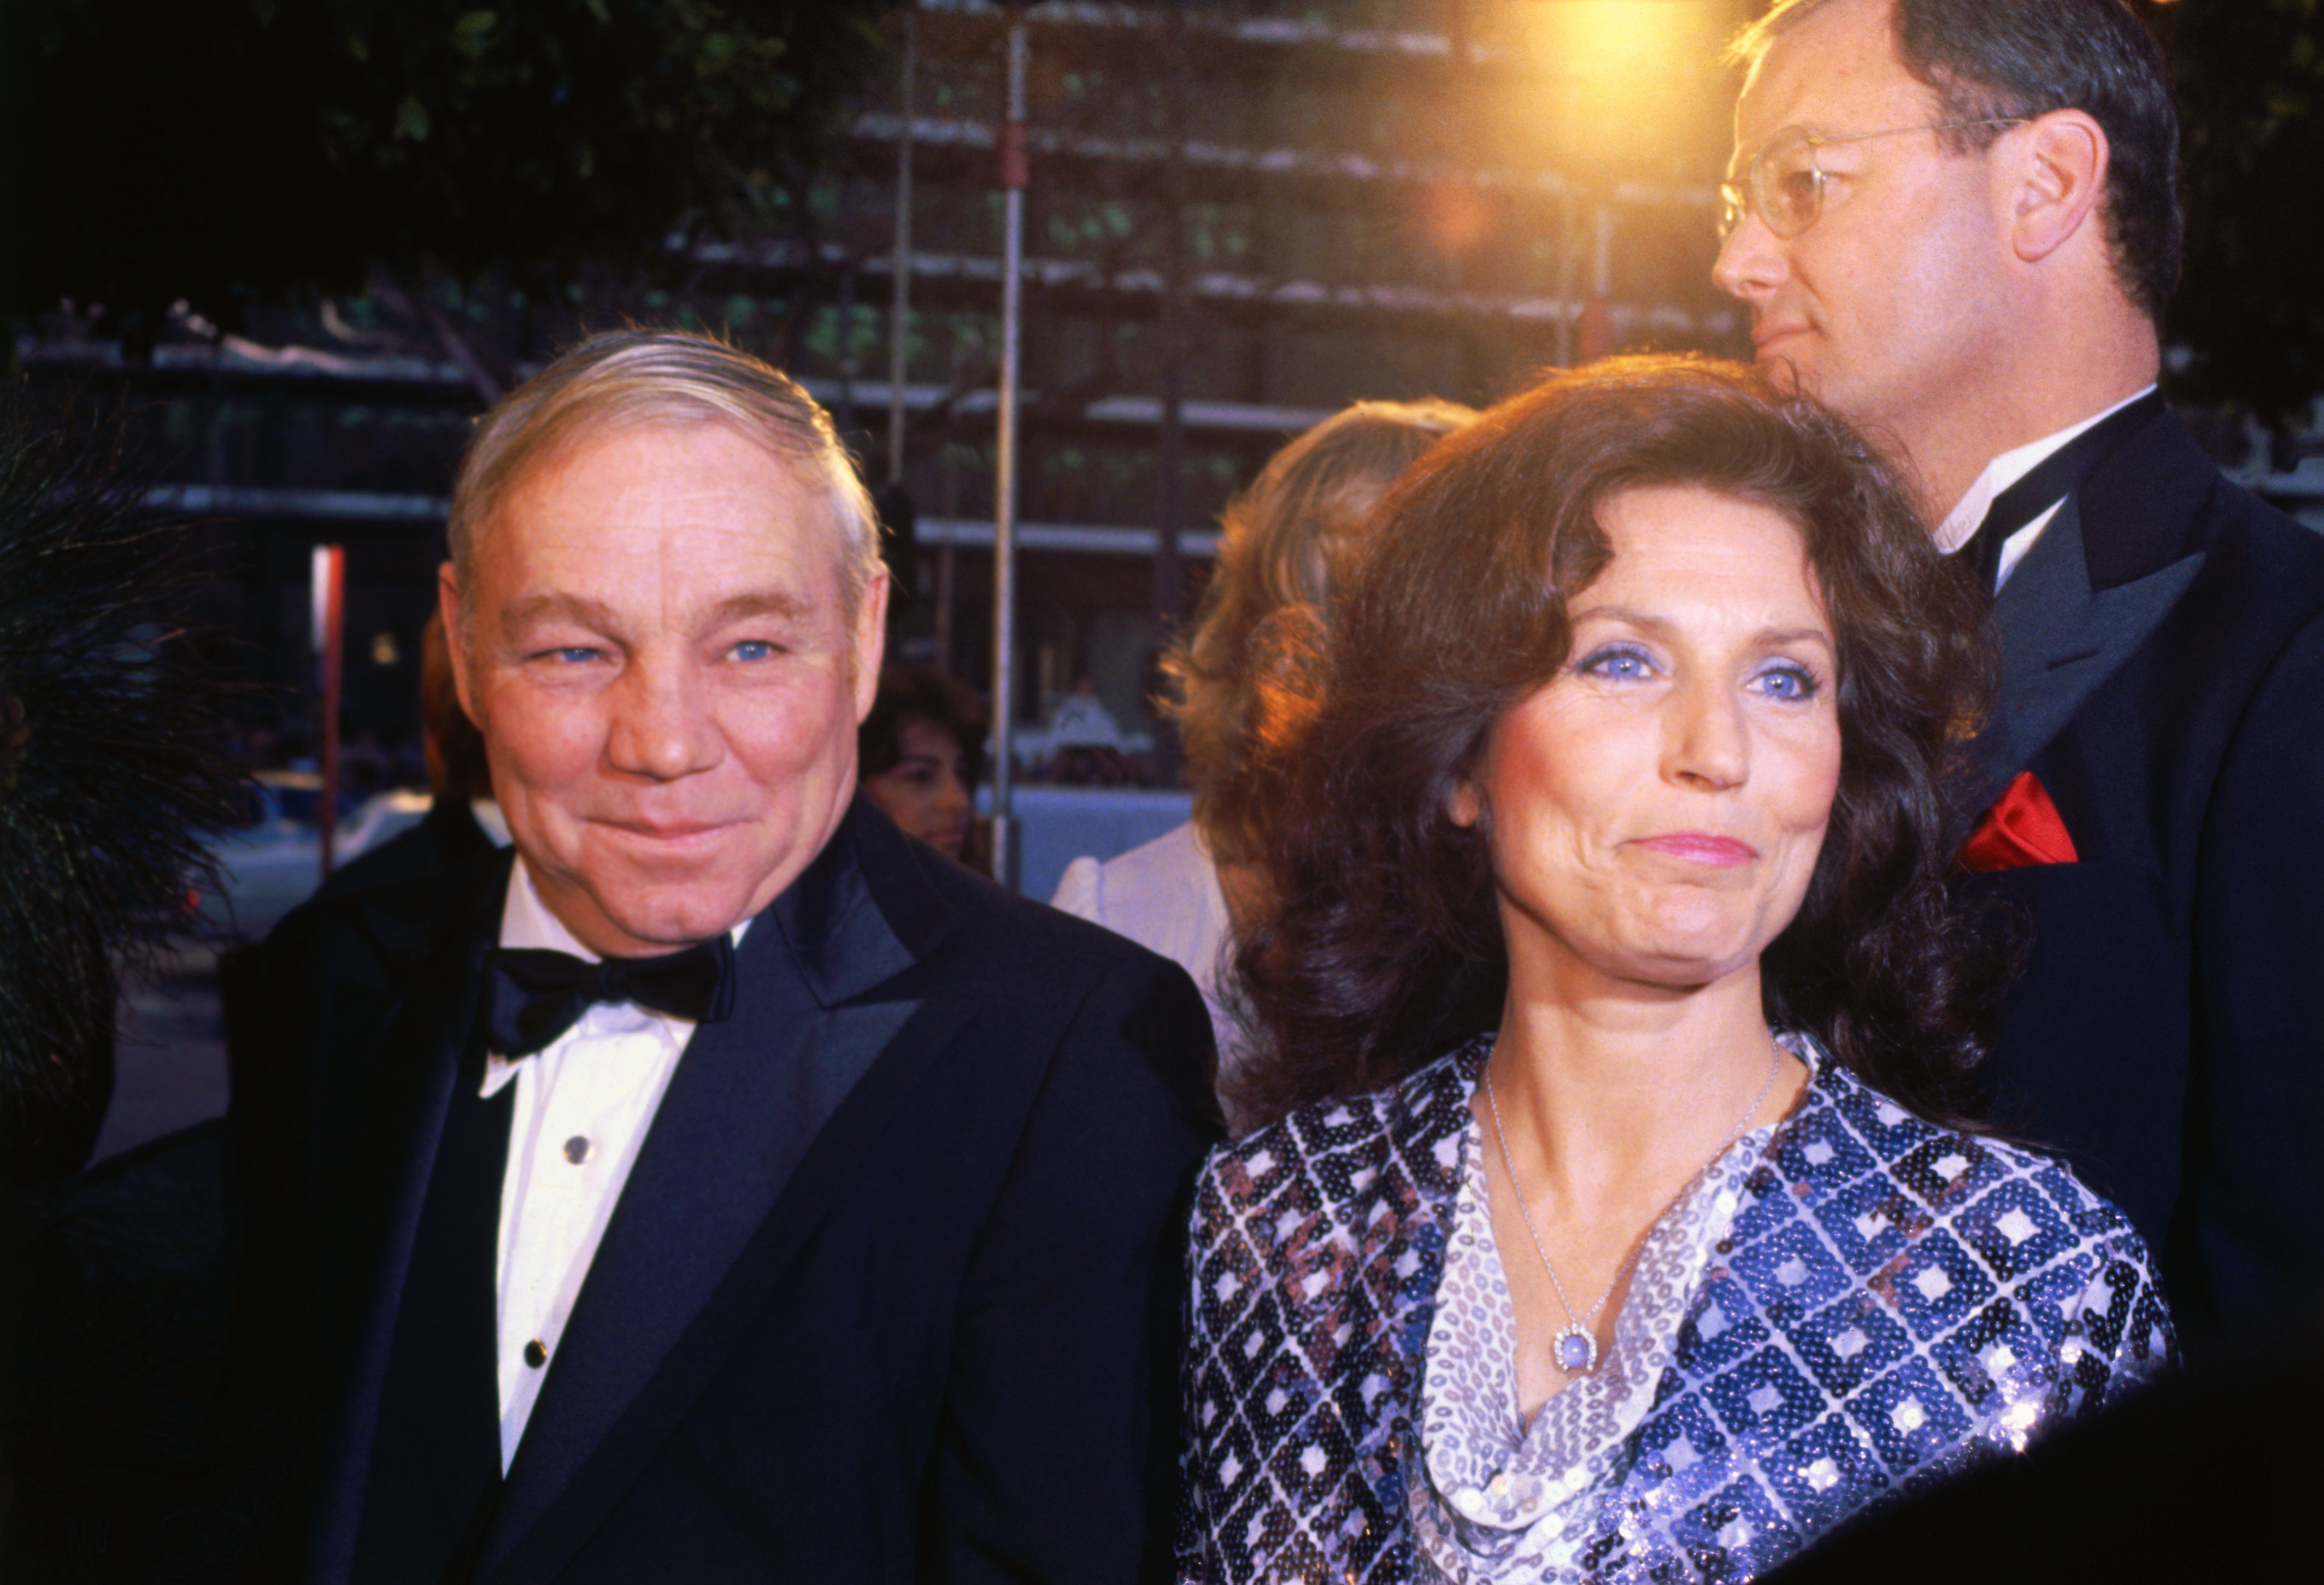 Loretta Lynn attends Academy Awards with her husband, Oliver Lynn, after "Coal Miner's Daughter," based on her own life, was nominated for Best Film. | Source Getty Images